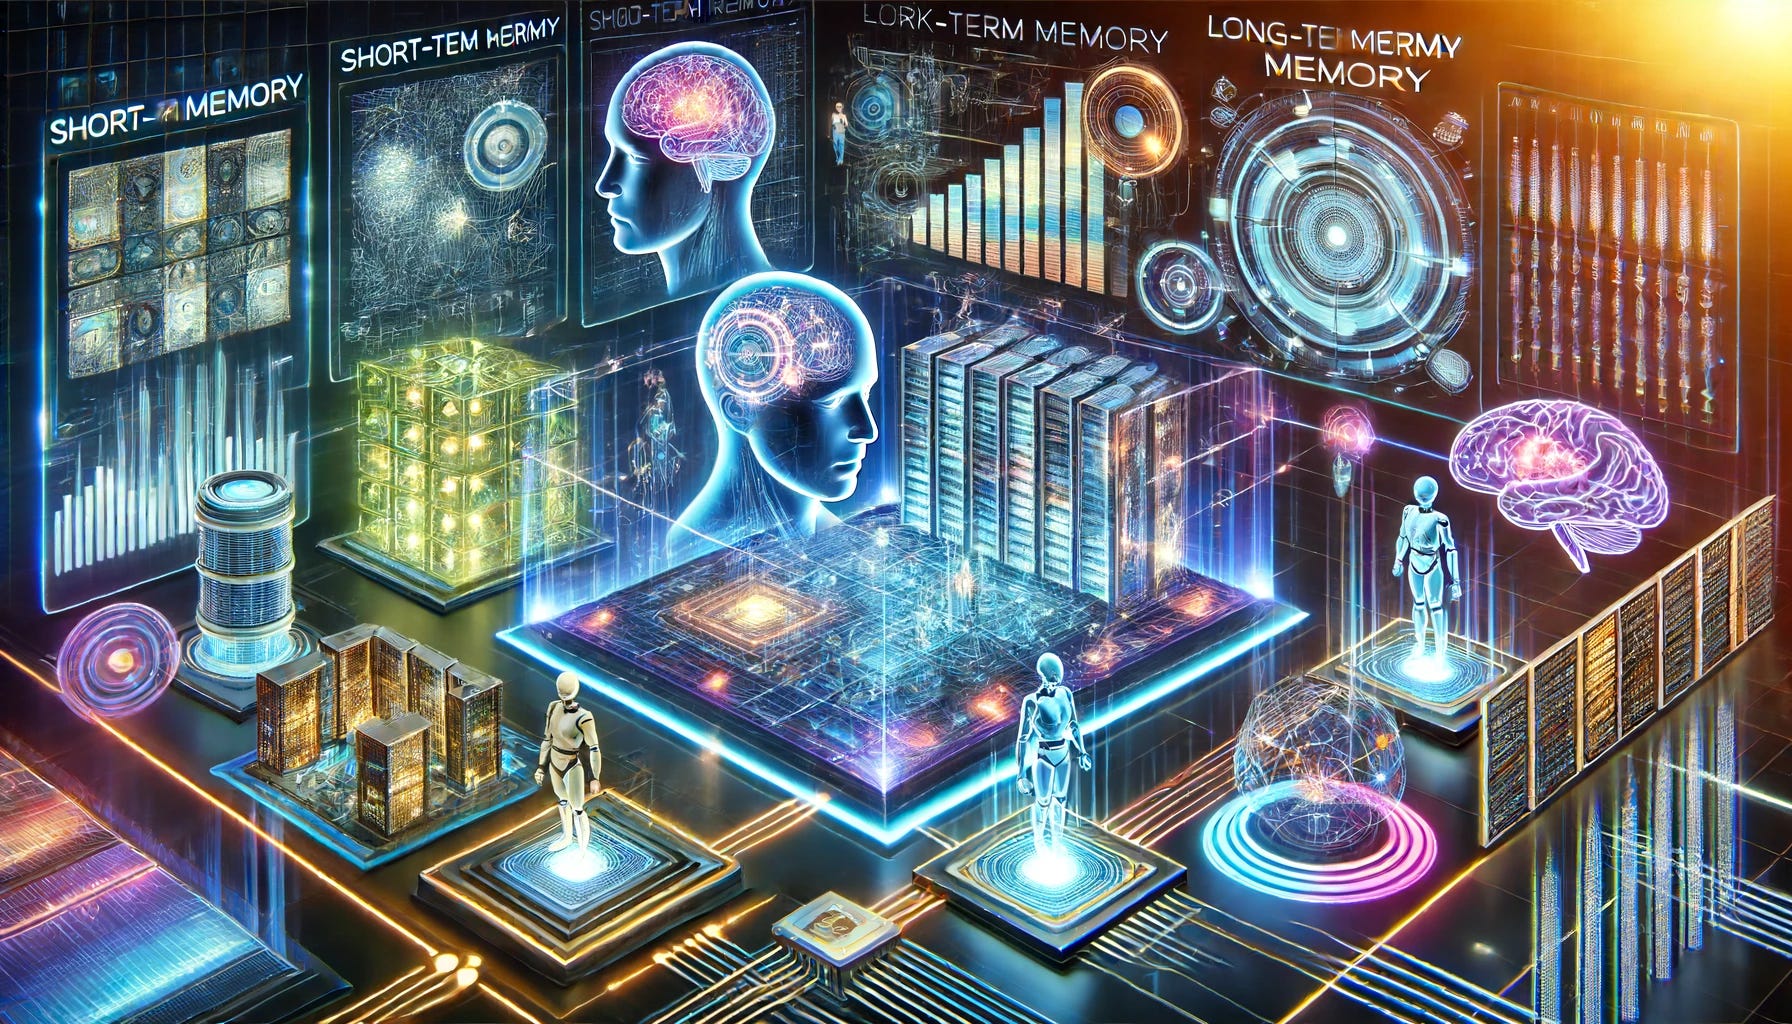 An illustration of artificial intelligence programs utilizing different forms of memory. Depict a futuristic, high-tech environment with various AI systems represented as sleek, holographic interfaces and robotic figures. Show some AI using short-term memory with elements like quick access storage units and data streams, while others utilize long-term memory, depicted with larger data banks and deep neural networks. Include glowing data lines connecting the different memory types to emphasize the flow and retention of information. The setting should be vibrant and technologically advanced, showcasing the complexity and sophistication of AI memory systems.